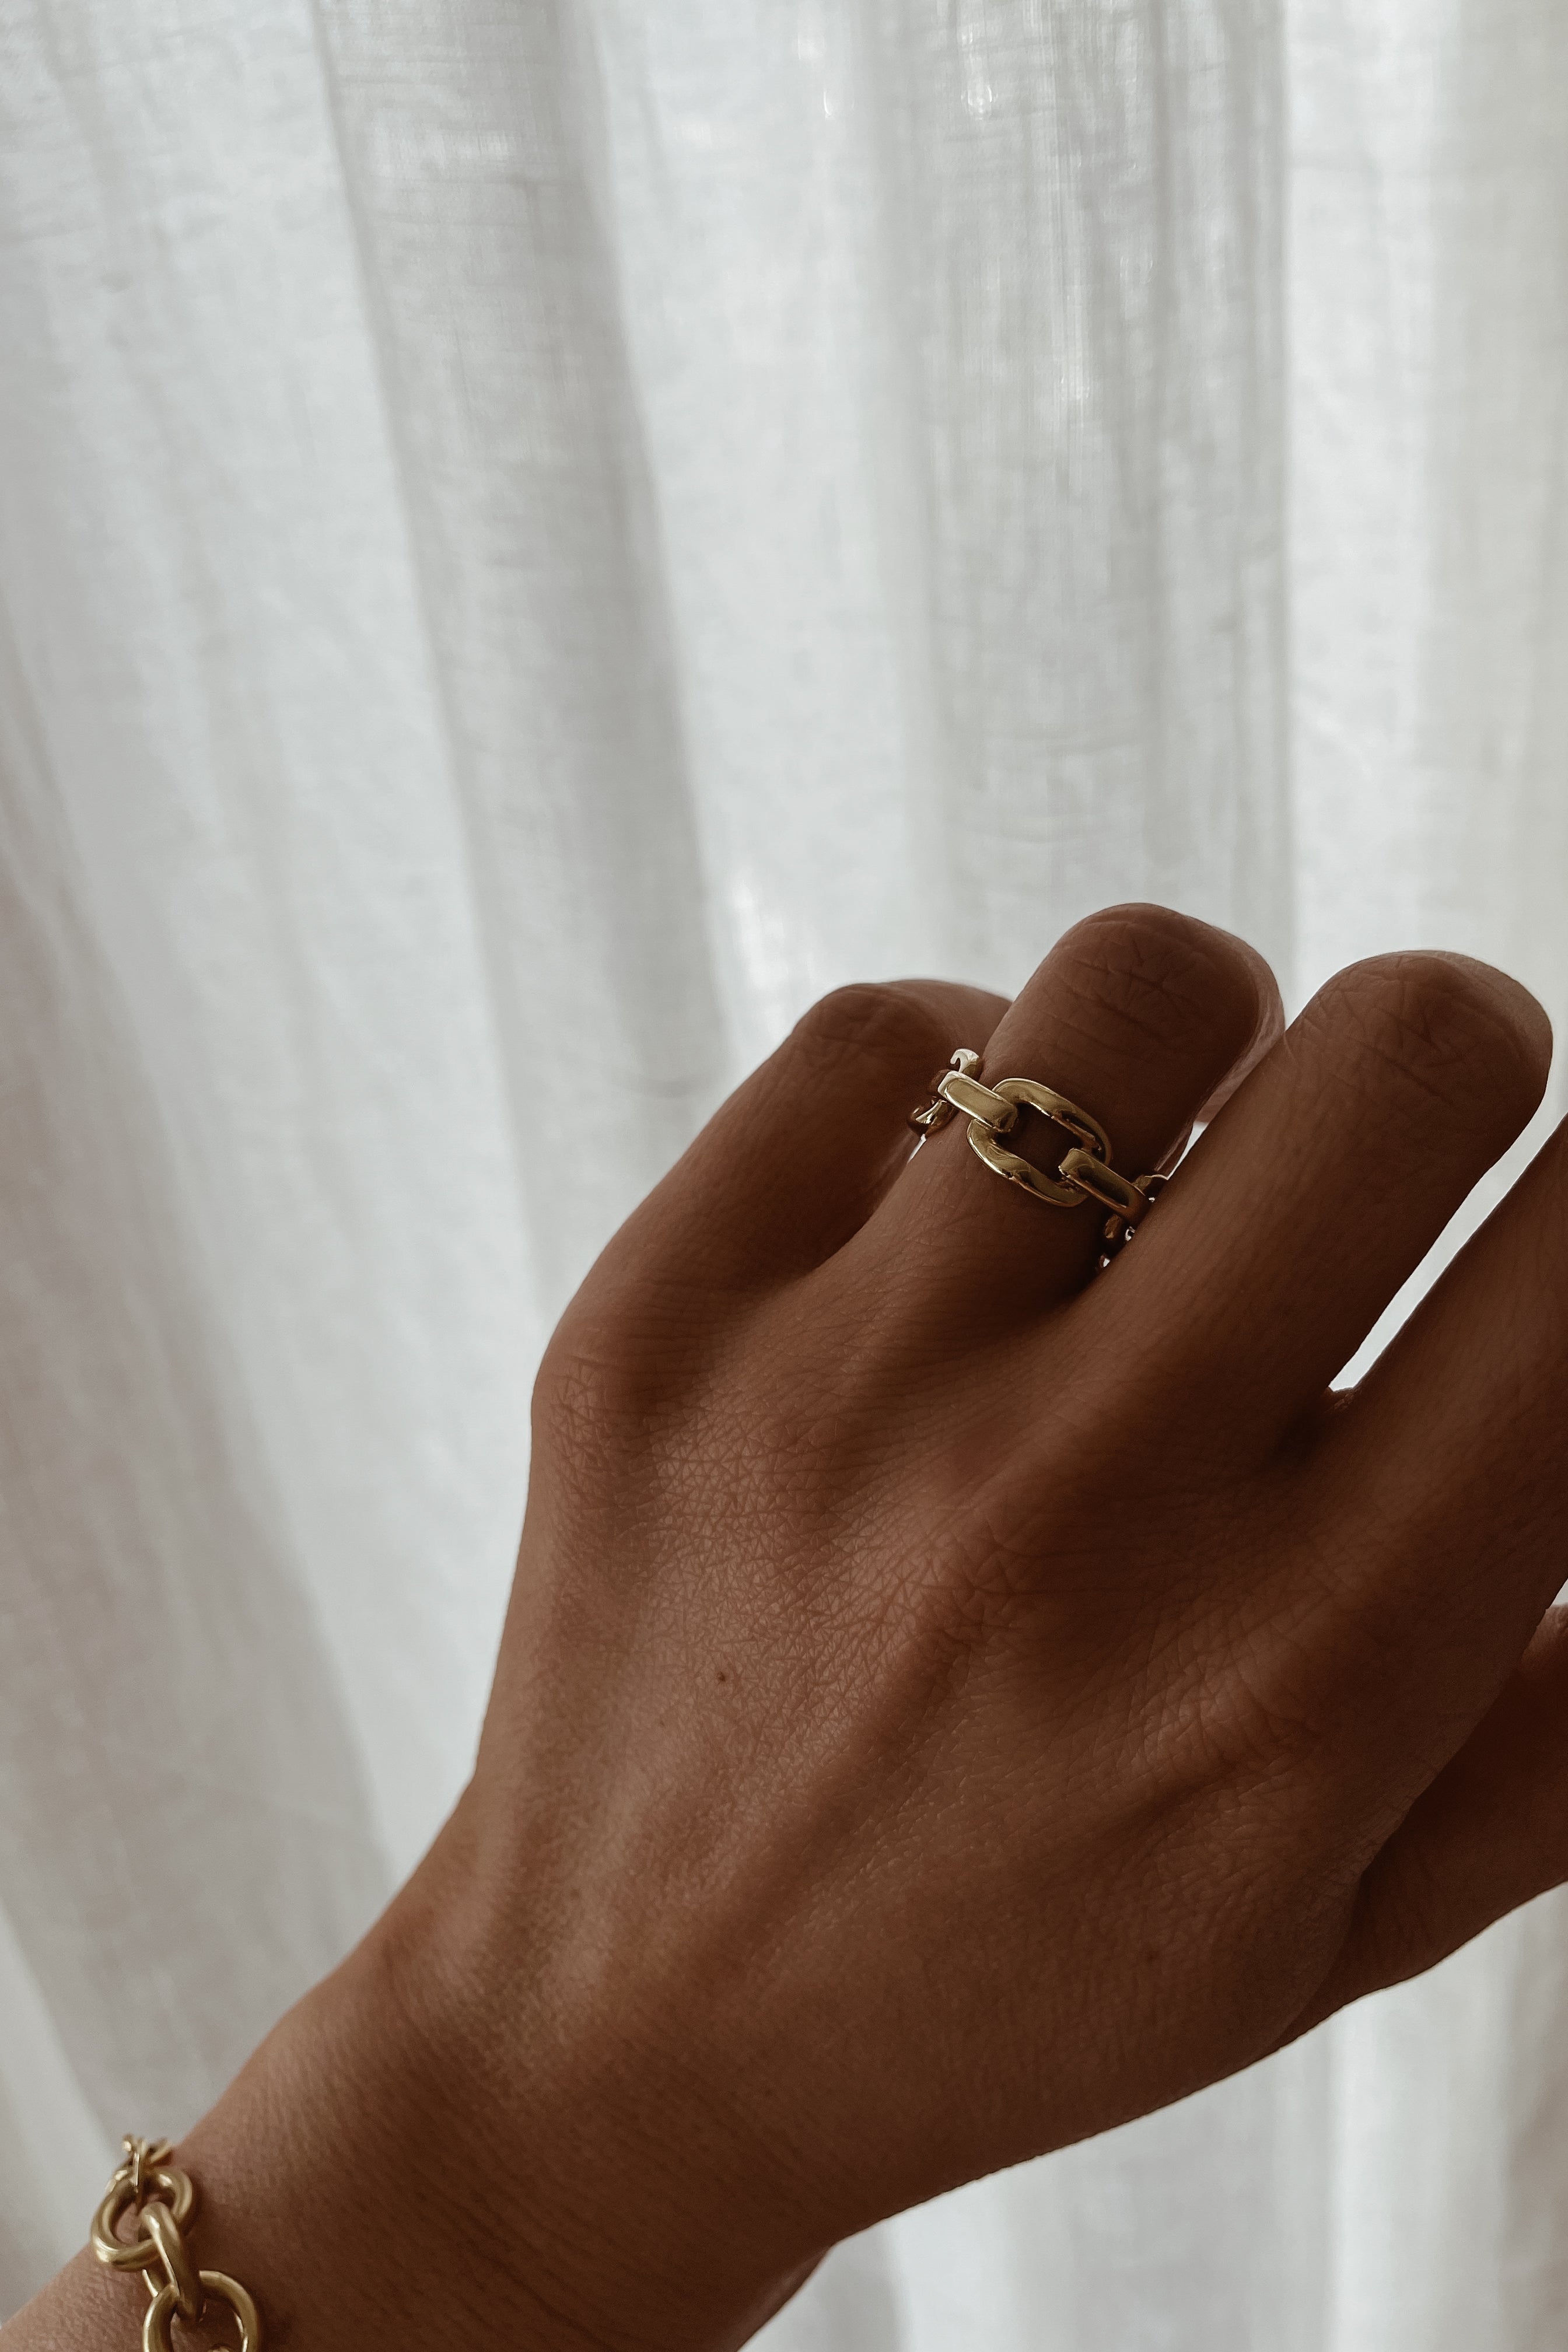 Vittoria Ring - Boutique Minimaliste has waterproof, durable, elegant and vintage inspired jewelry